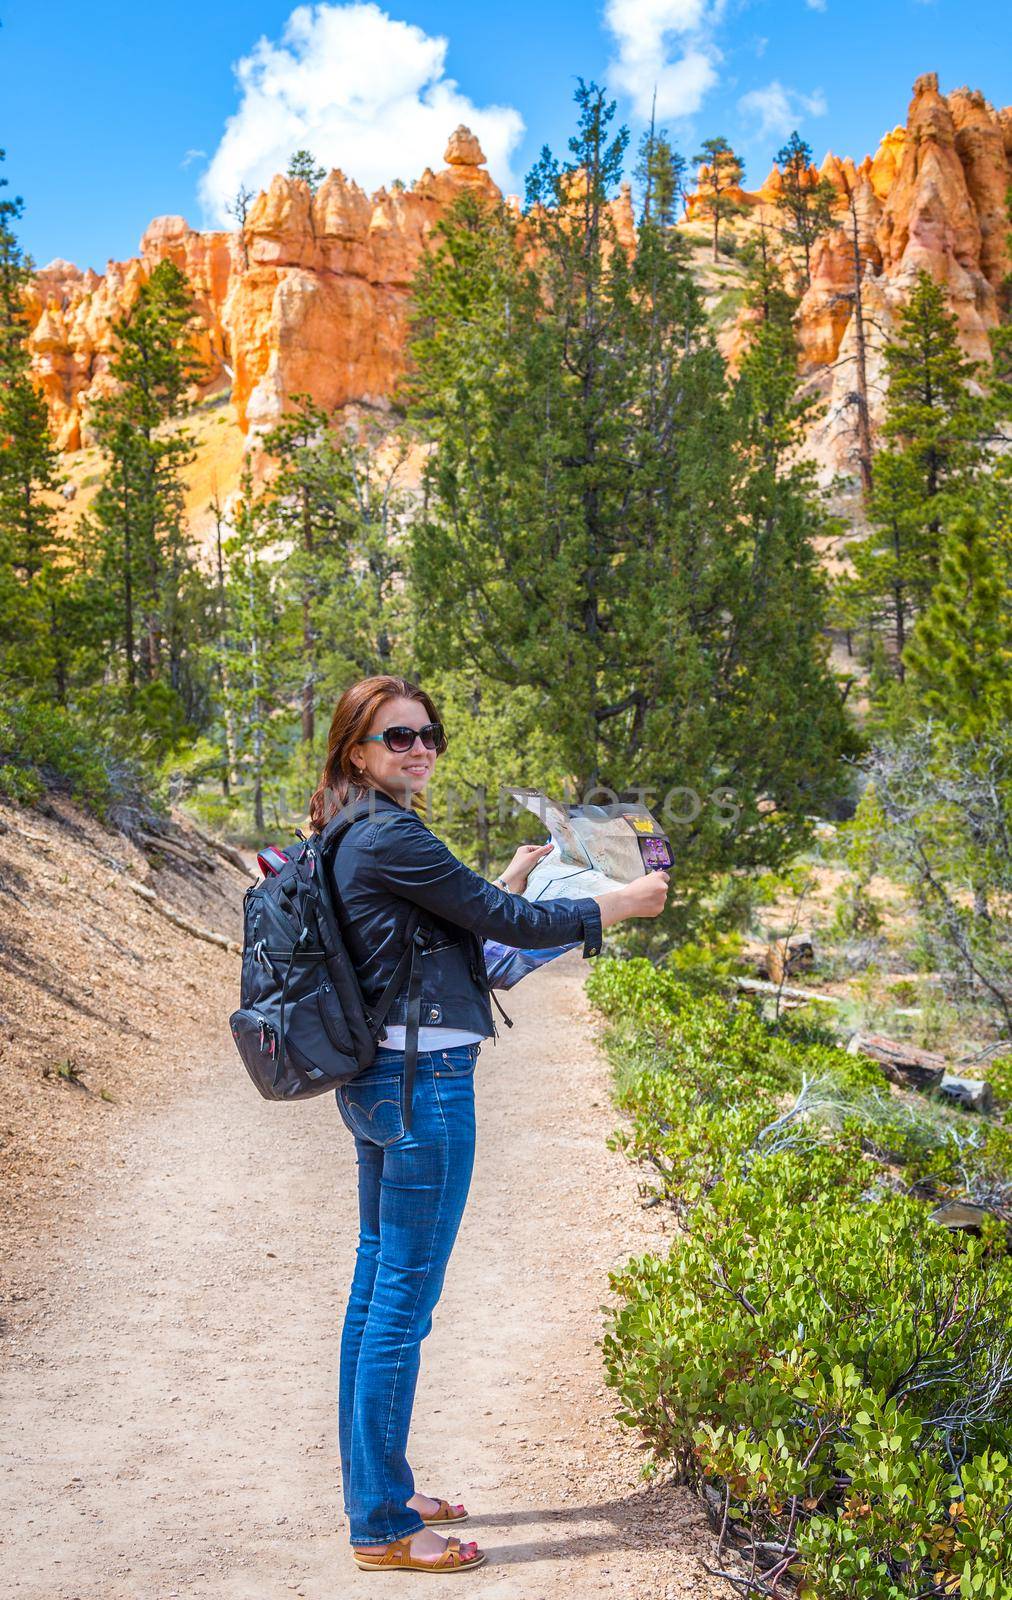 Girl searching right direction on map in Bryce Canyon, USA